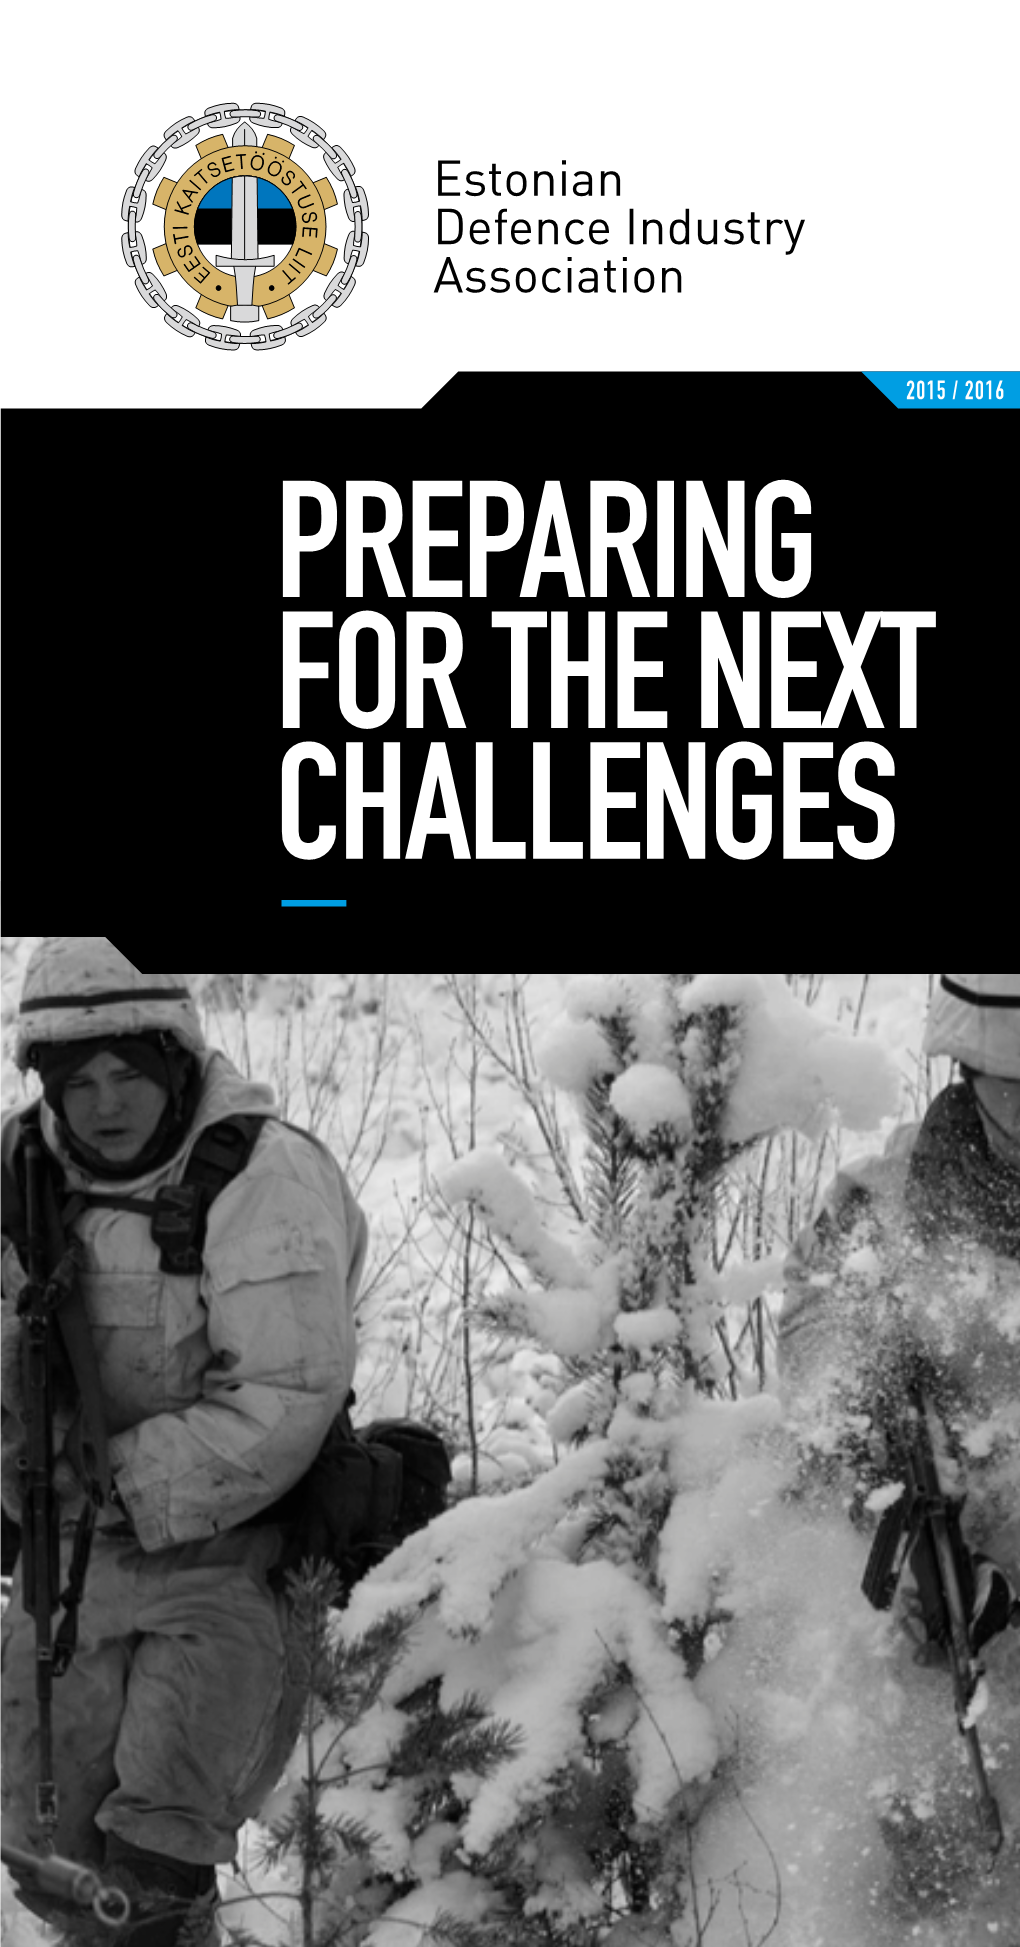 PREPARING for the NEXT CHALLENGES PREPARING for the NEXT CHALLENGES EDIA FACTS Table of & FIGURES Contents 2015 / 2016 04